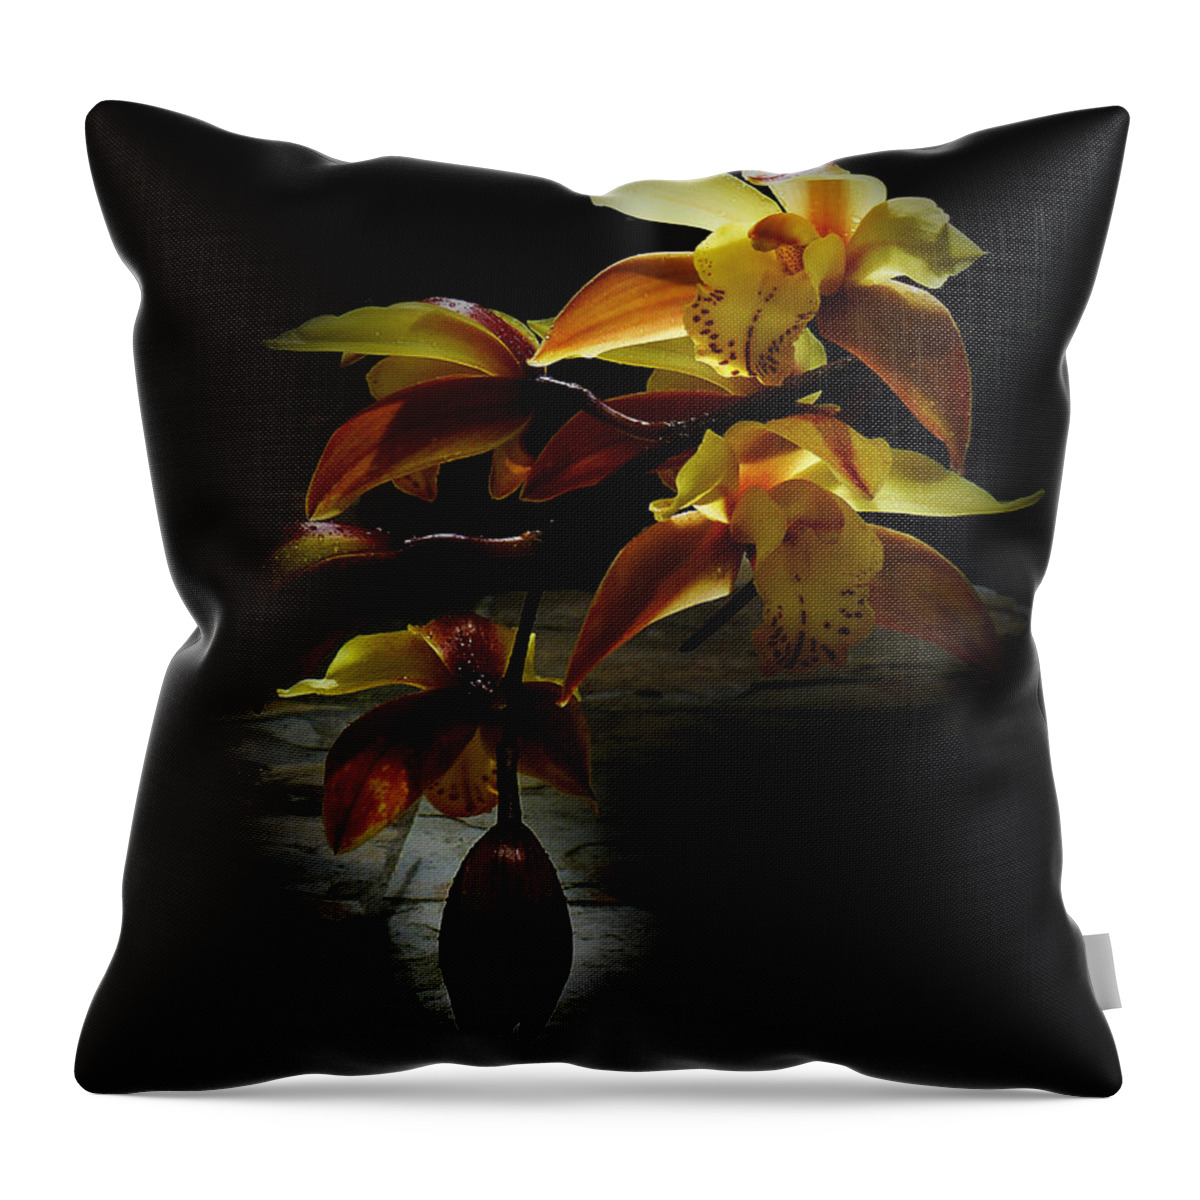 Orchid Throw Pillow featuring the photograph My Orchid 2 by Xueling Zou